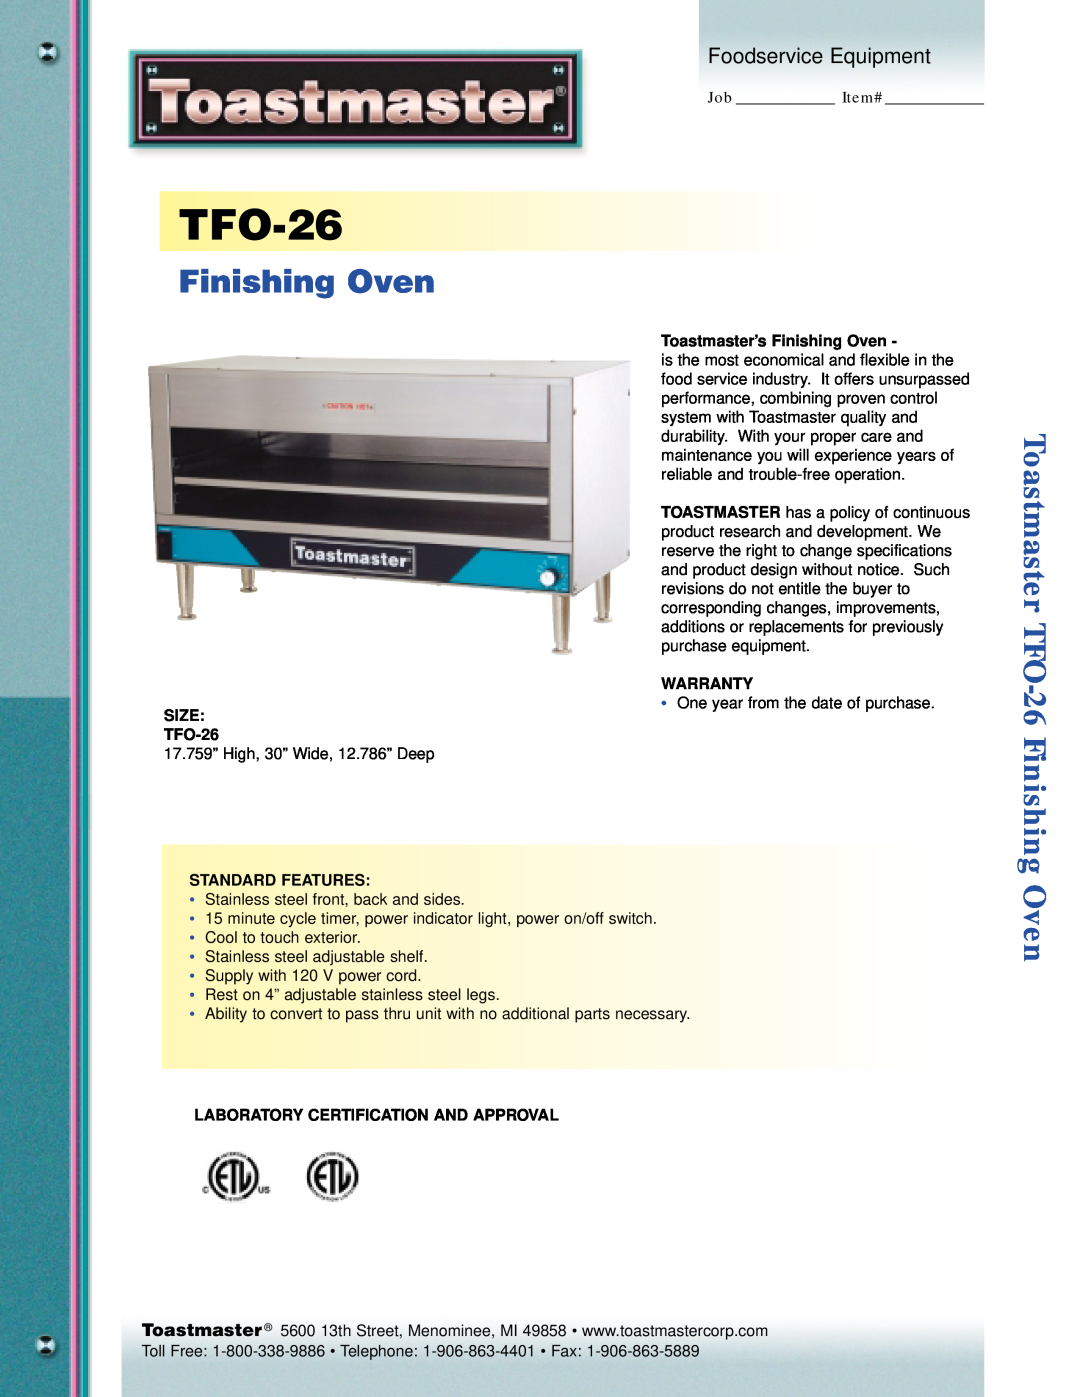 Toastmaster specifications Toastmaster’s Finishing Oven, Warranty, SIZE TFO-26, Standard Features 